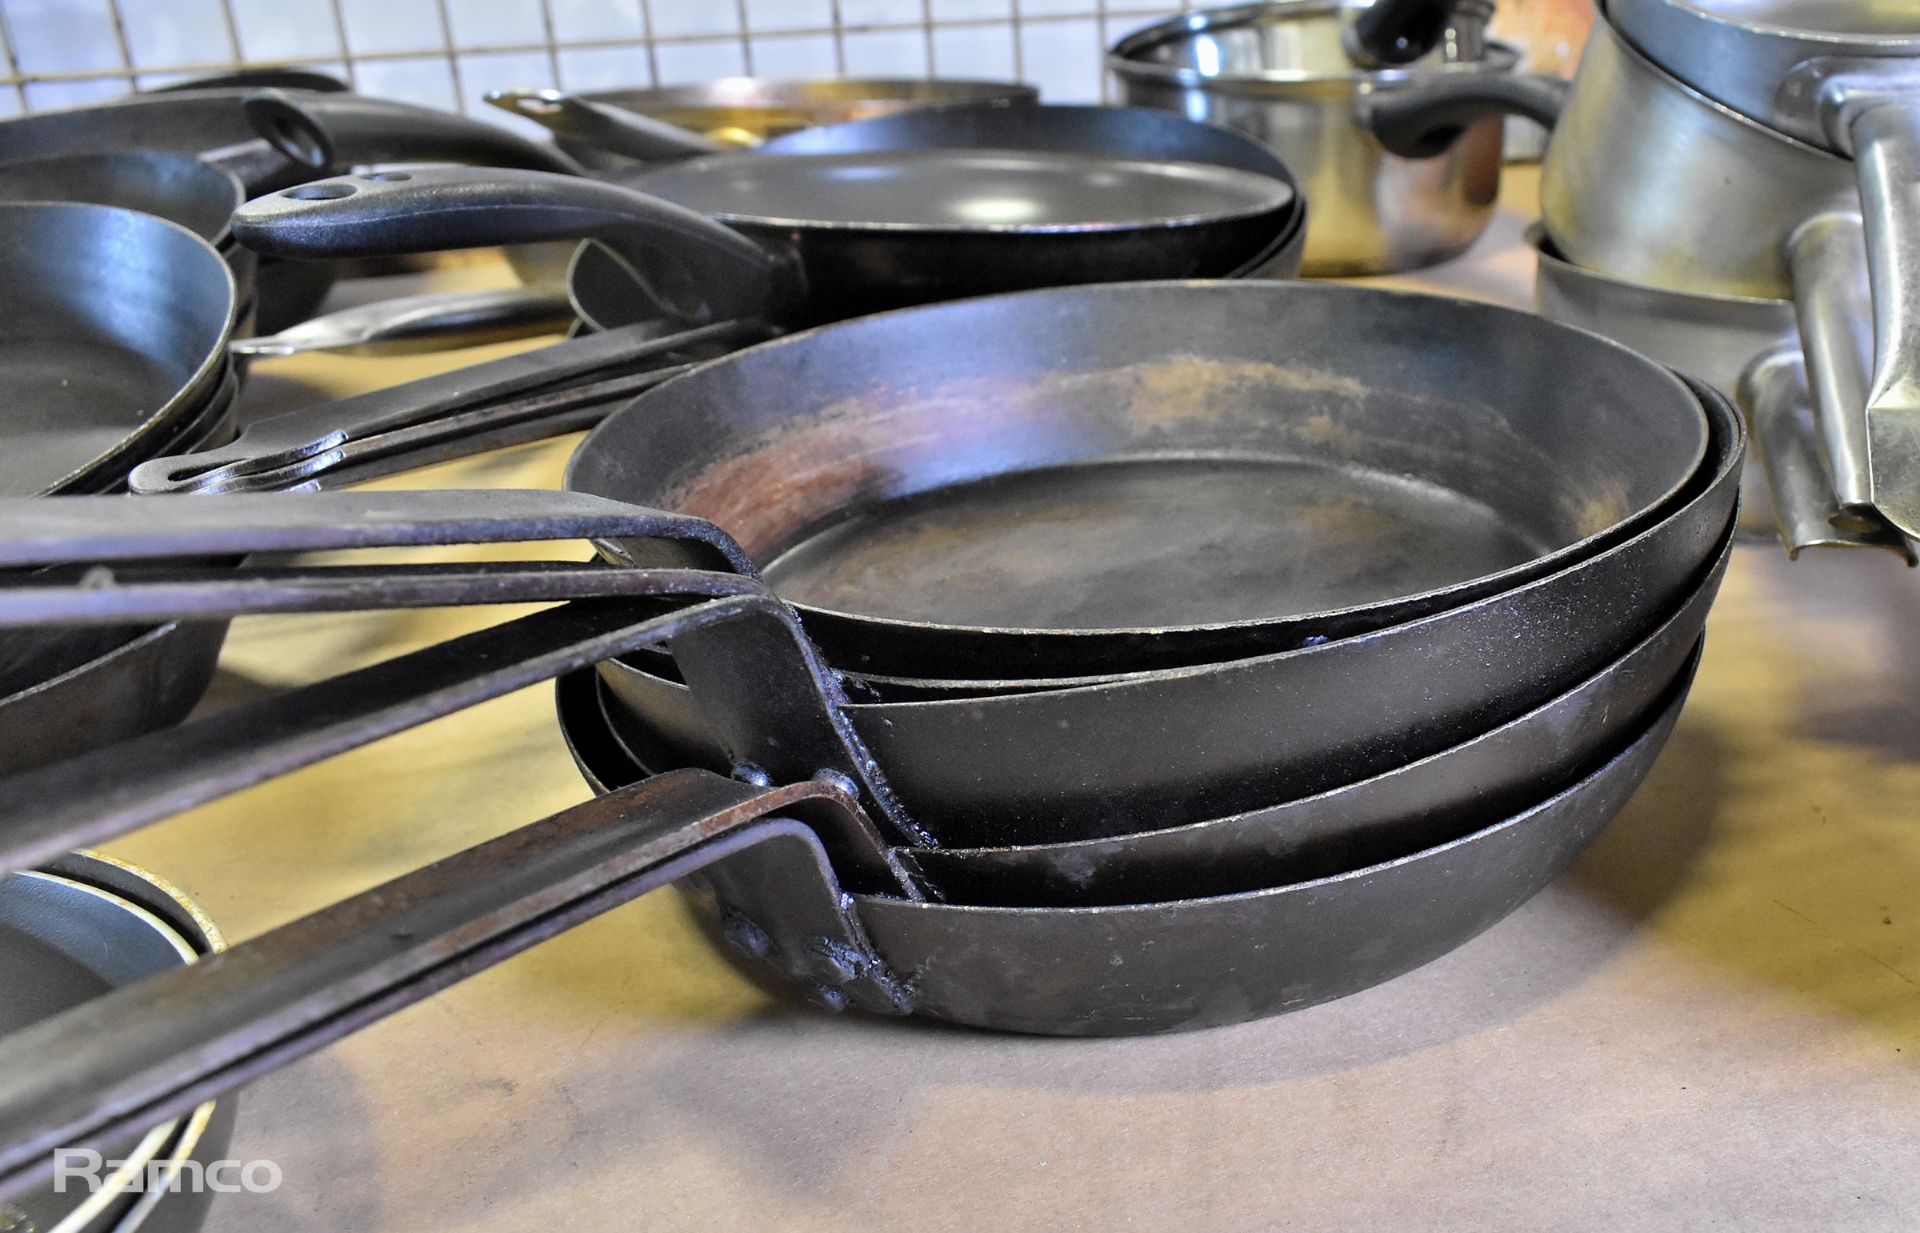 Catering equipment small and large frying pan, sauce pans, pan with lids - Image 3 of 5